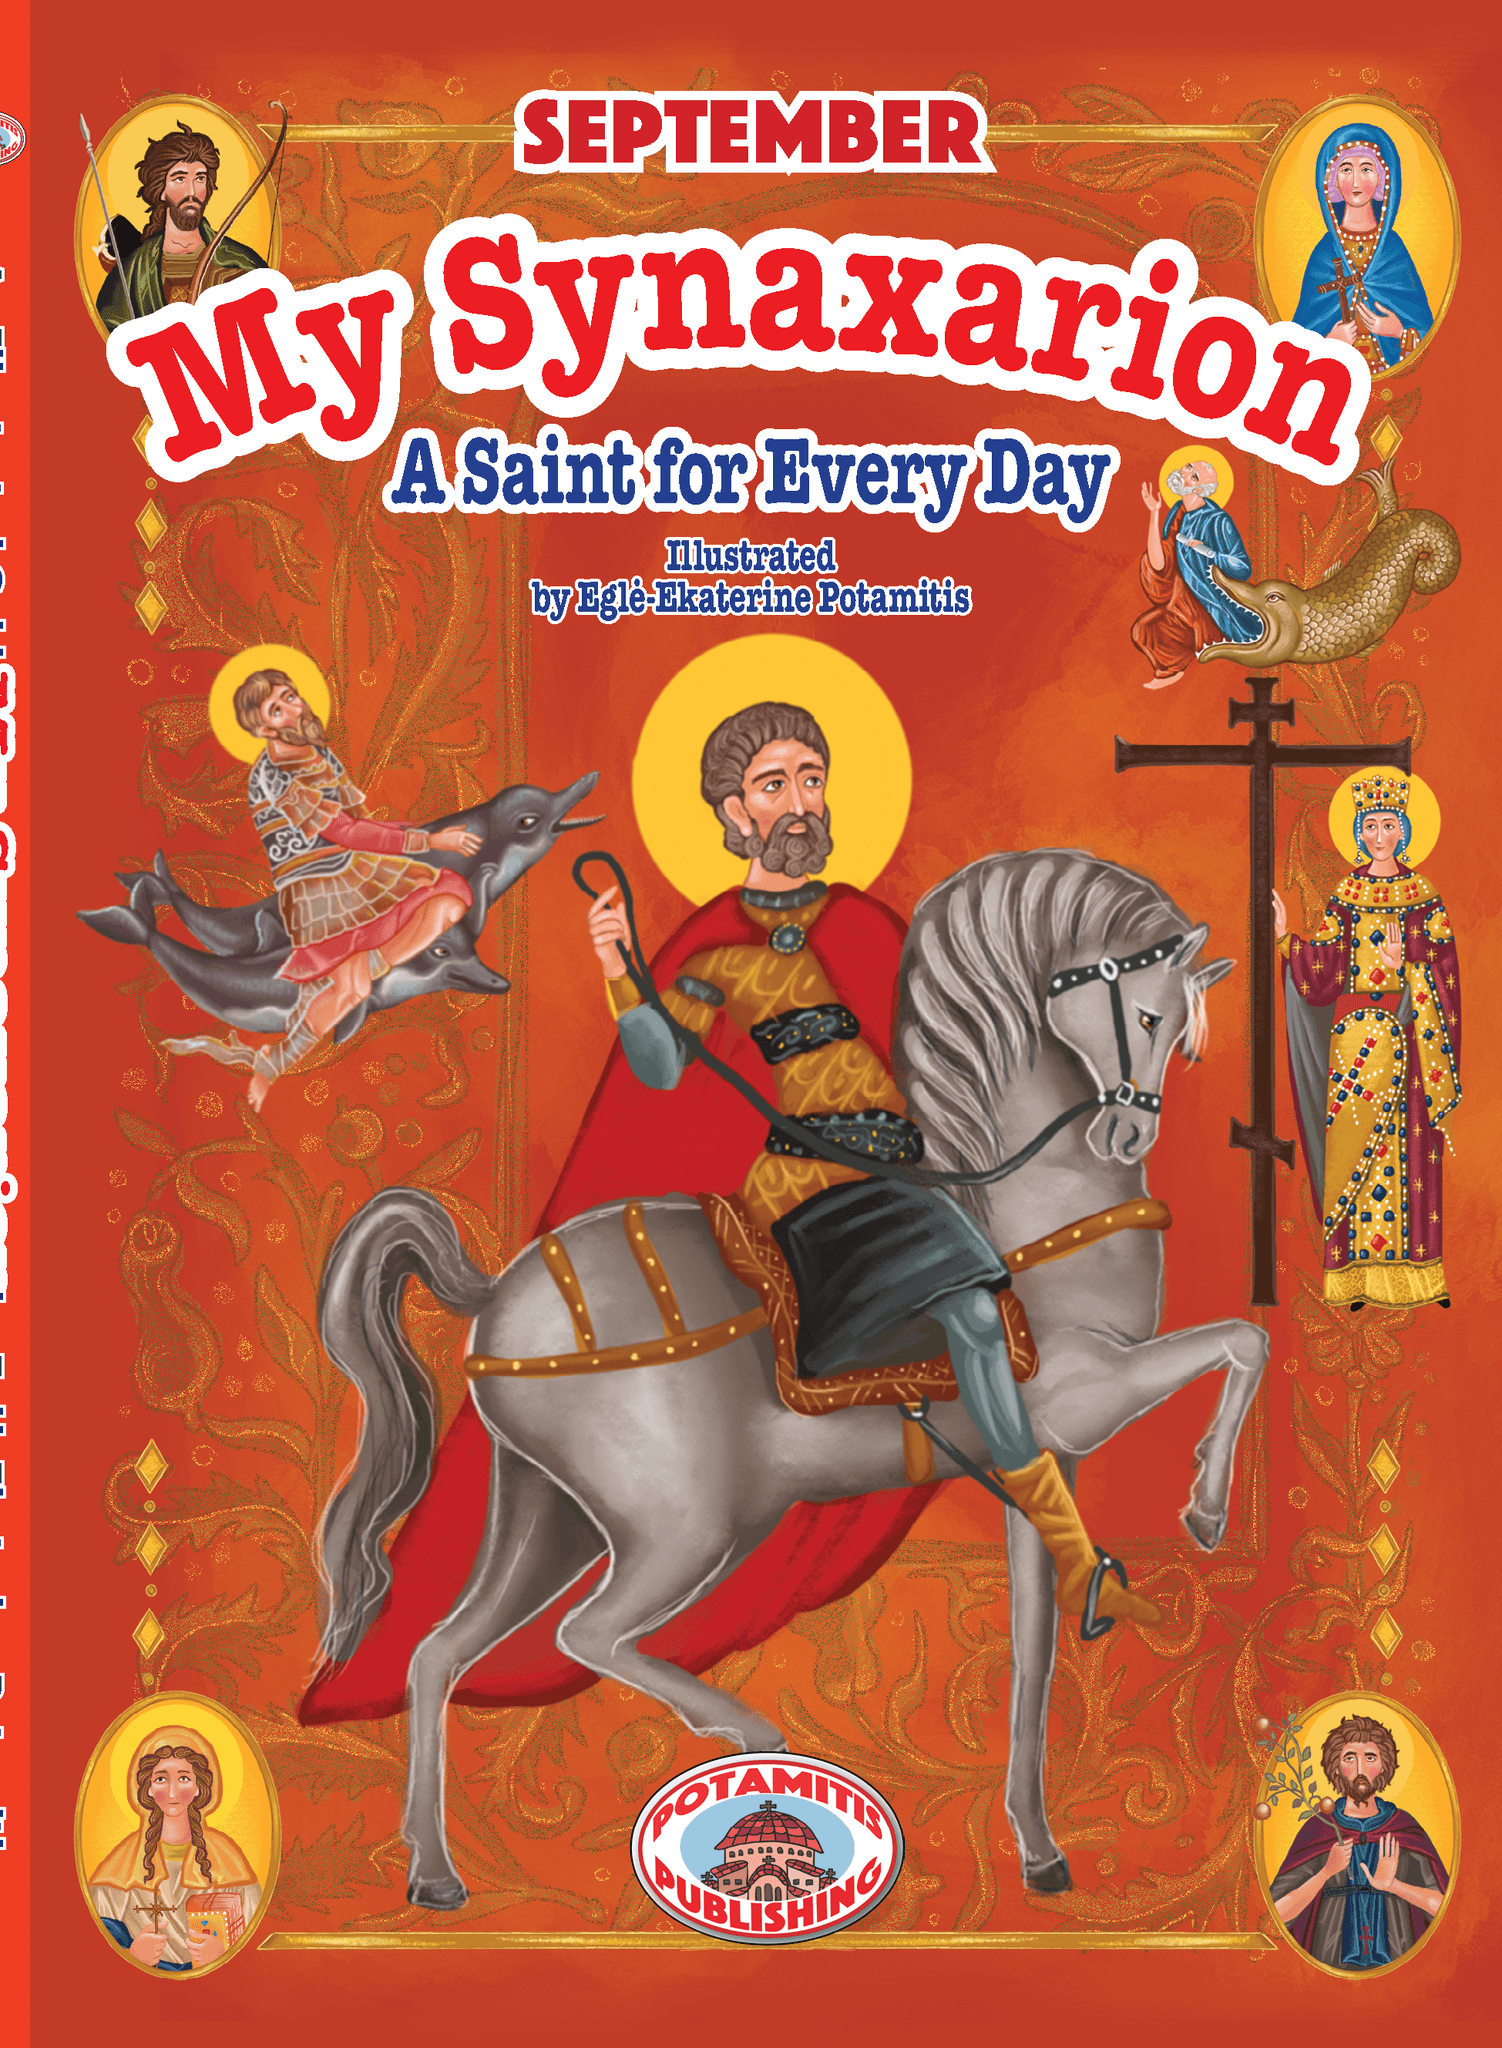 My Synaxarion - A Saint for Every Day [September] - Holy Cross Monastery